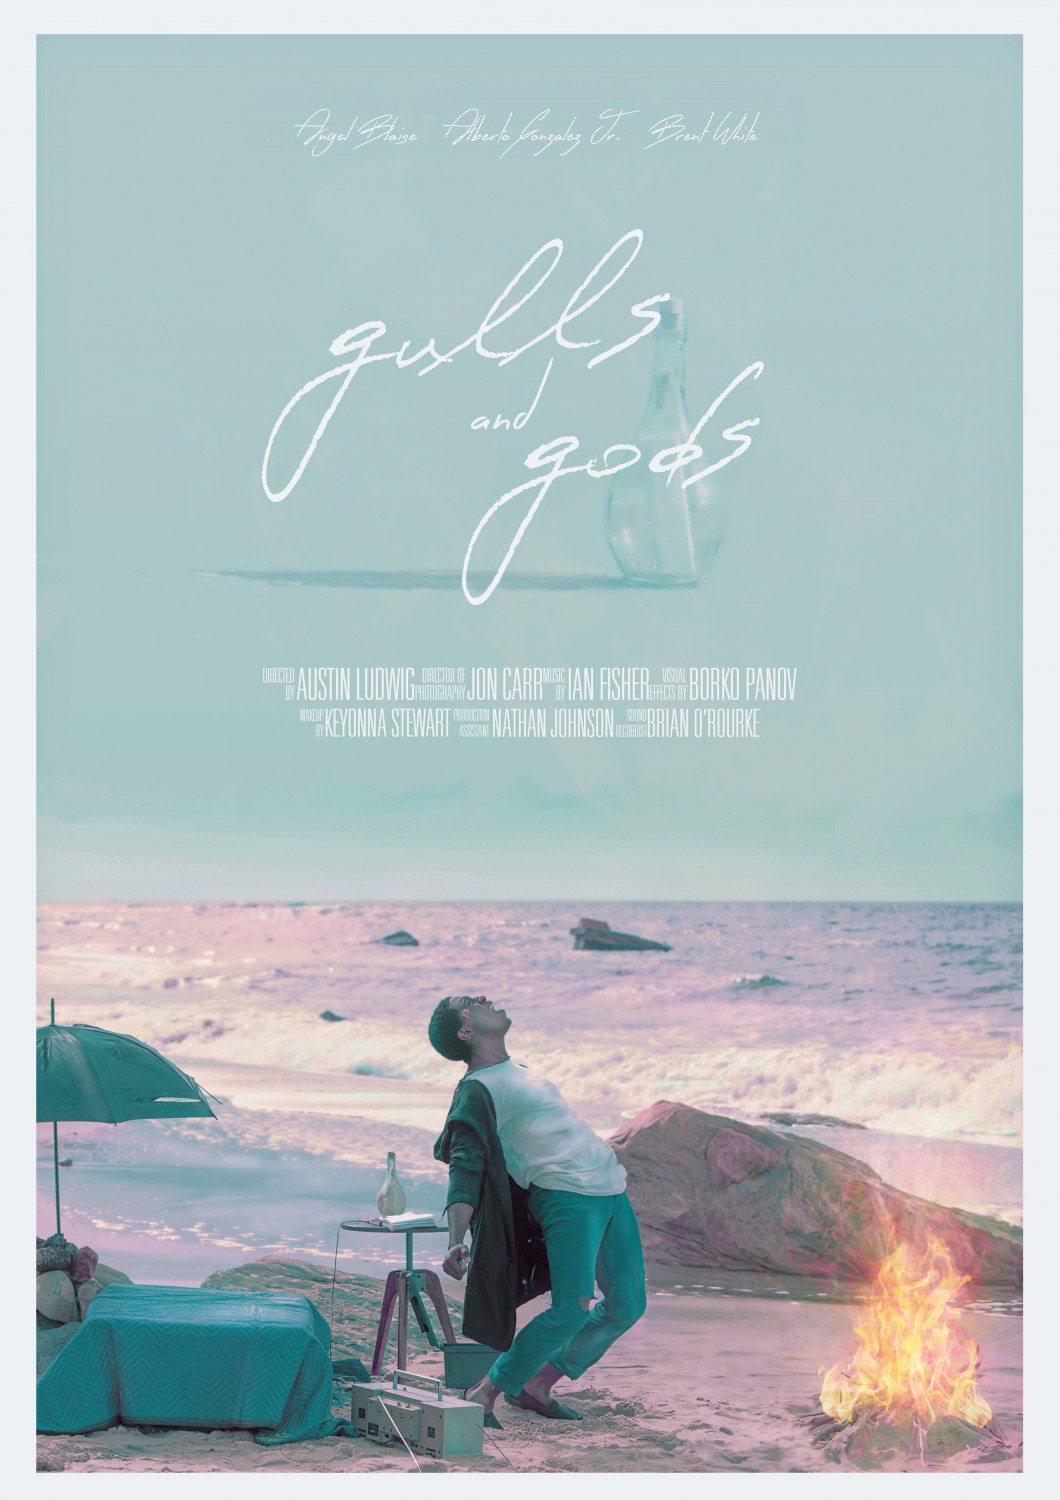 Extra Large Movie Poster Image for Gulls and Gods